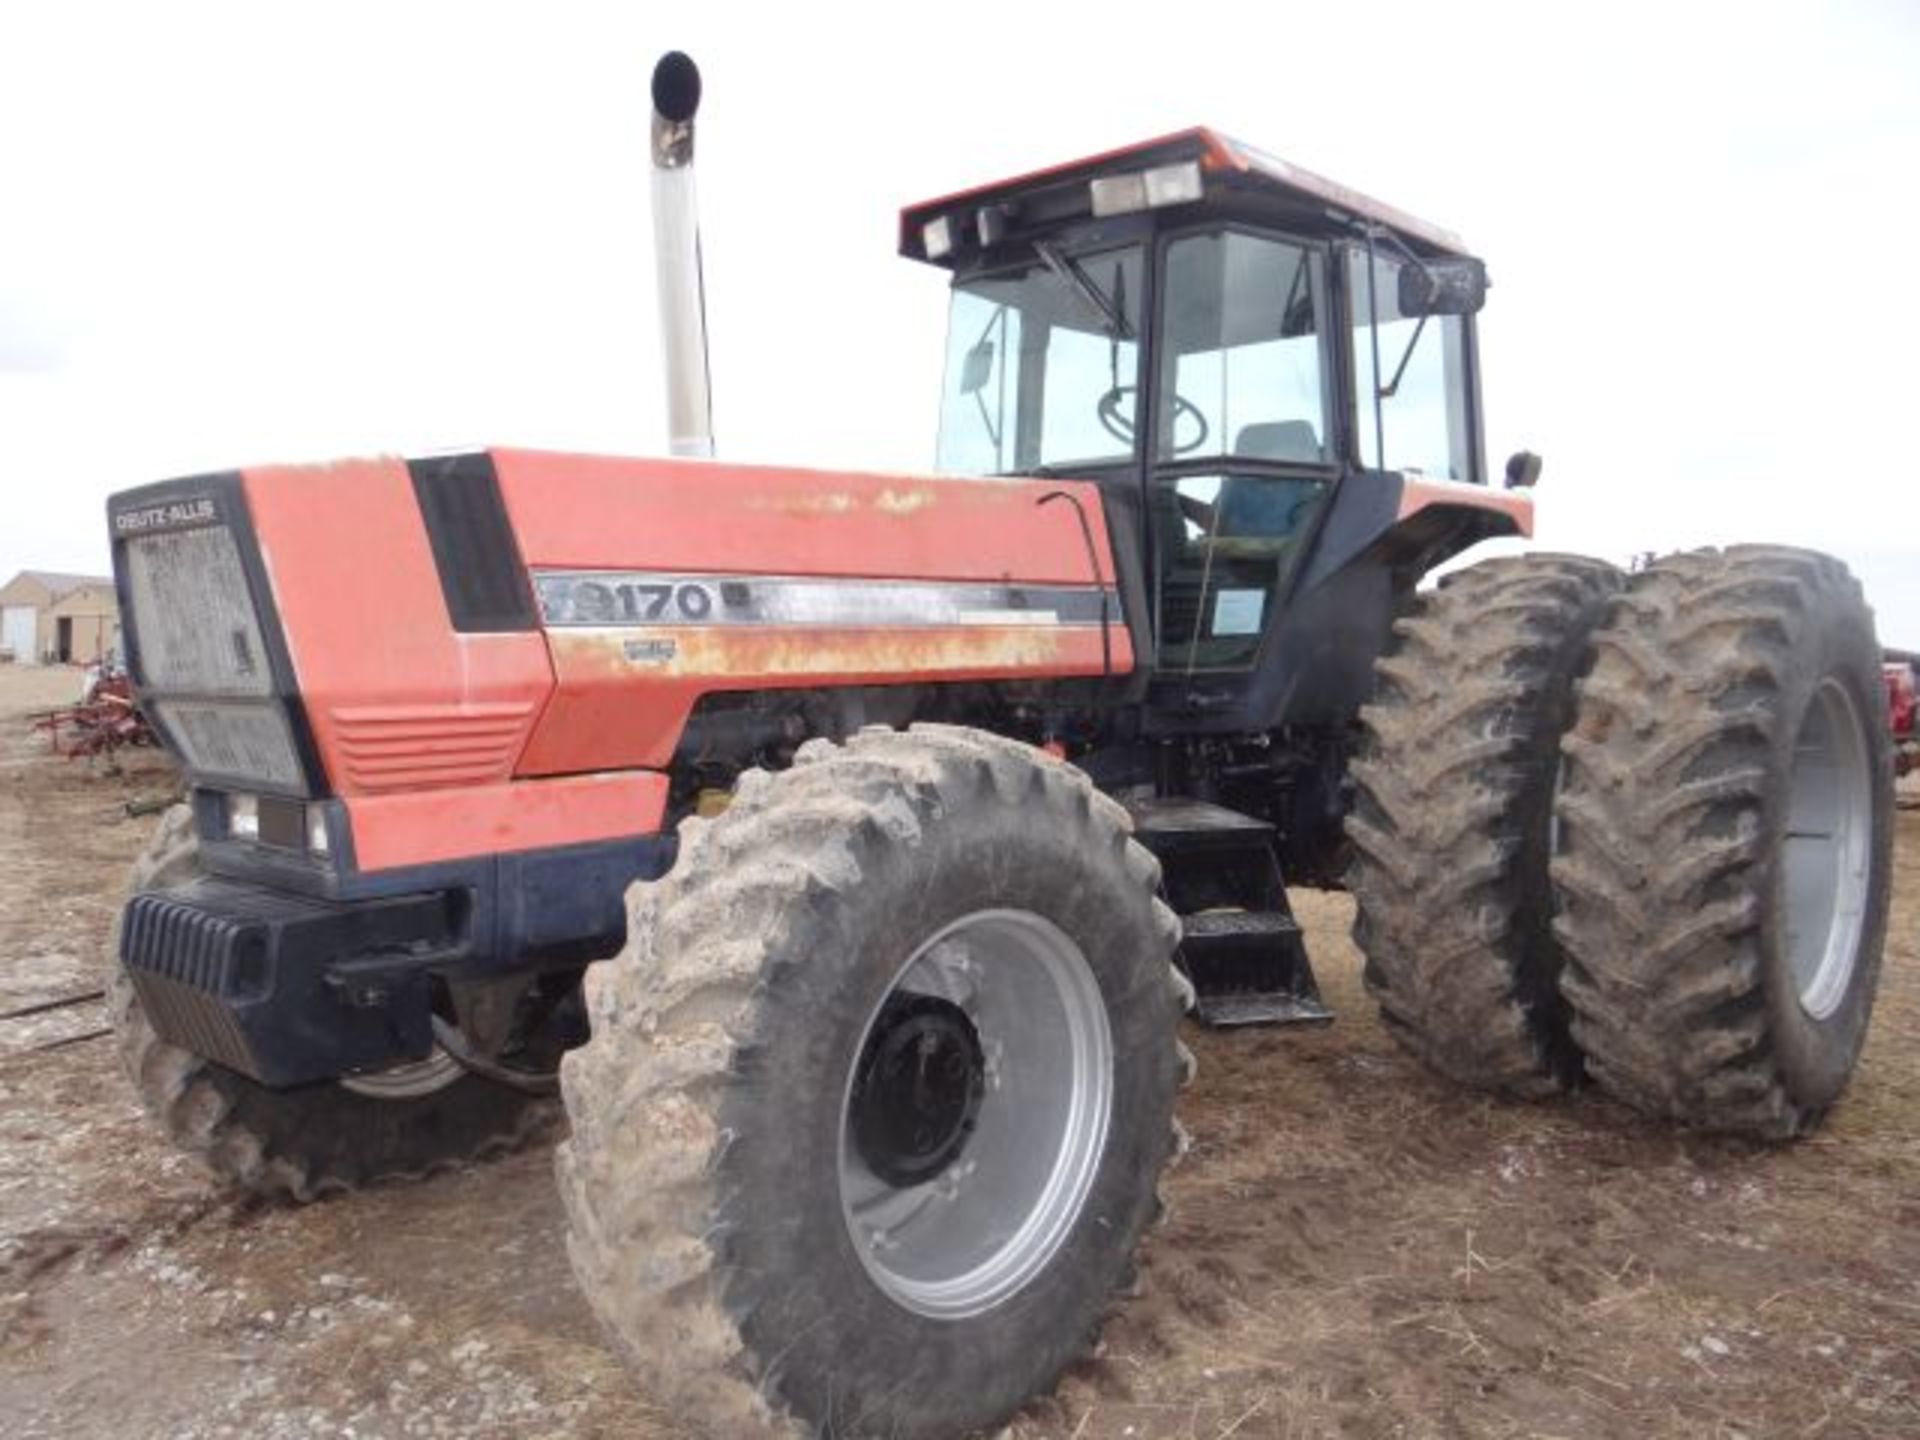 Duetz Allis 9170 Tractor 5460 hrs, New Rubber on Rear, Cold AC, Diesel, MFWD, Good Tractor